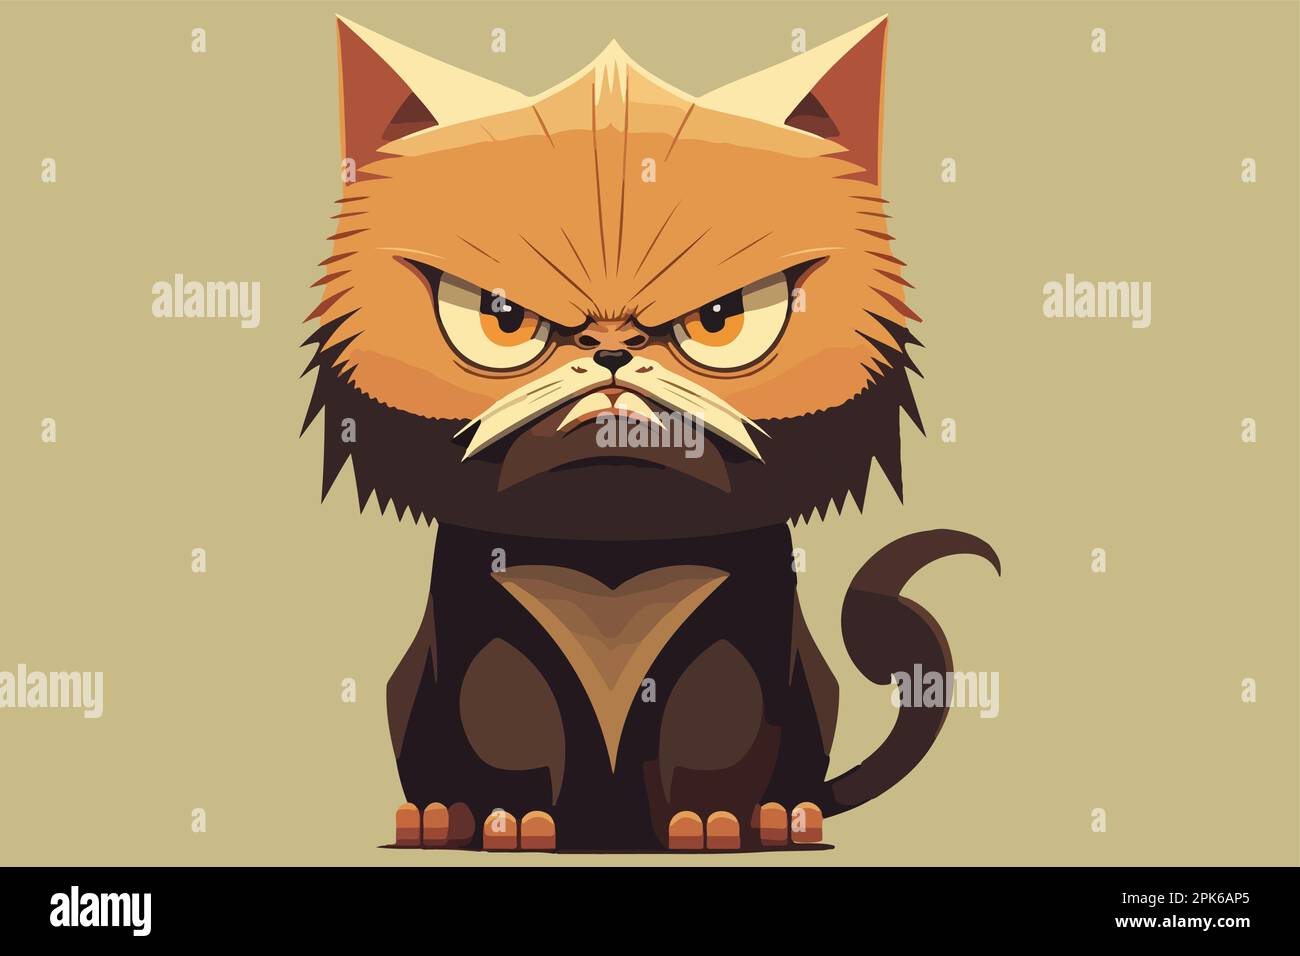 Angry cat face Royalty Free Vector Image - VectorStock